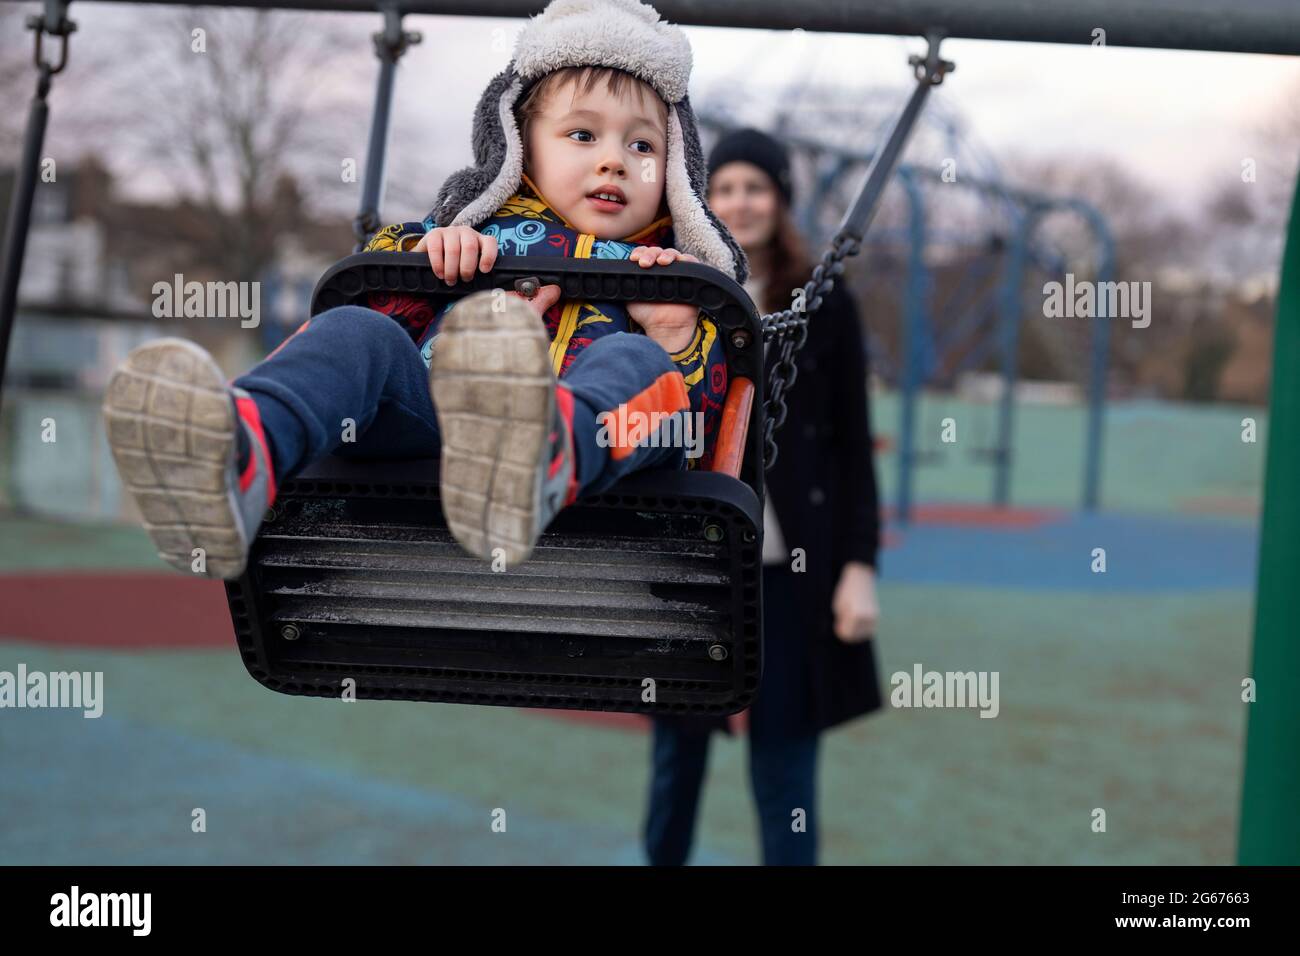 A young child being pushed on a swing Stock Photo